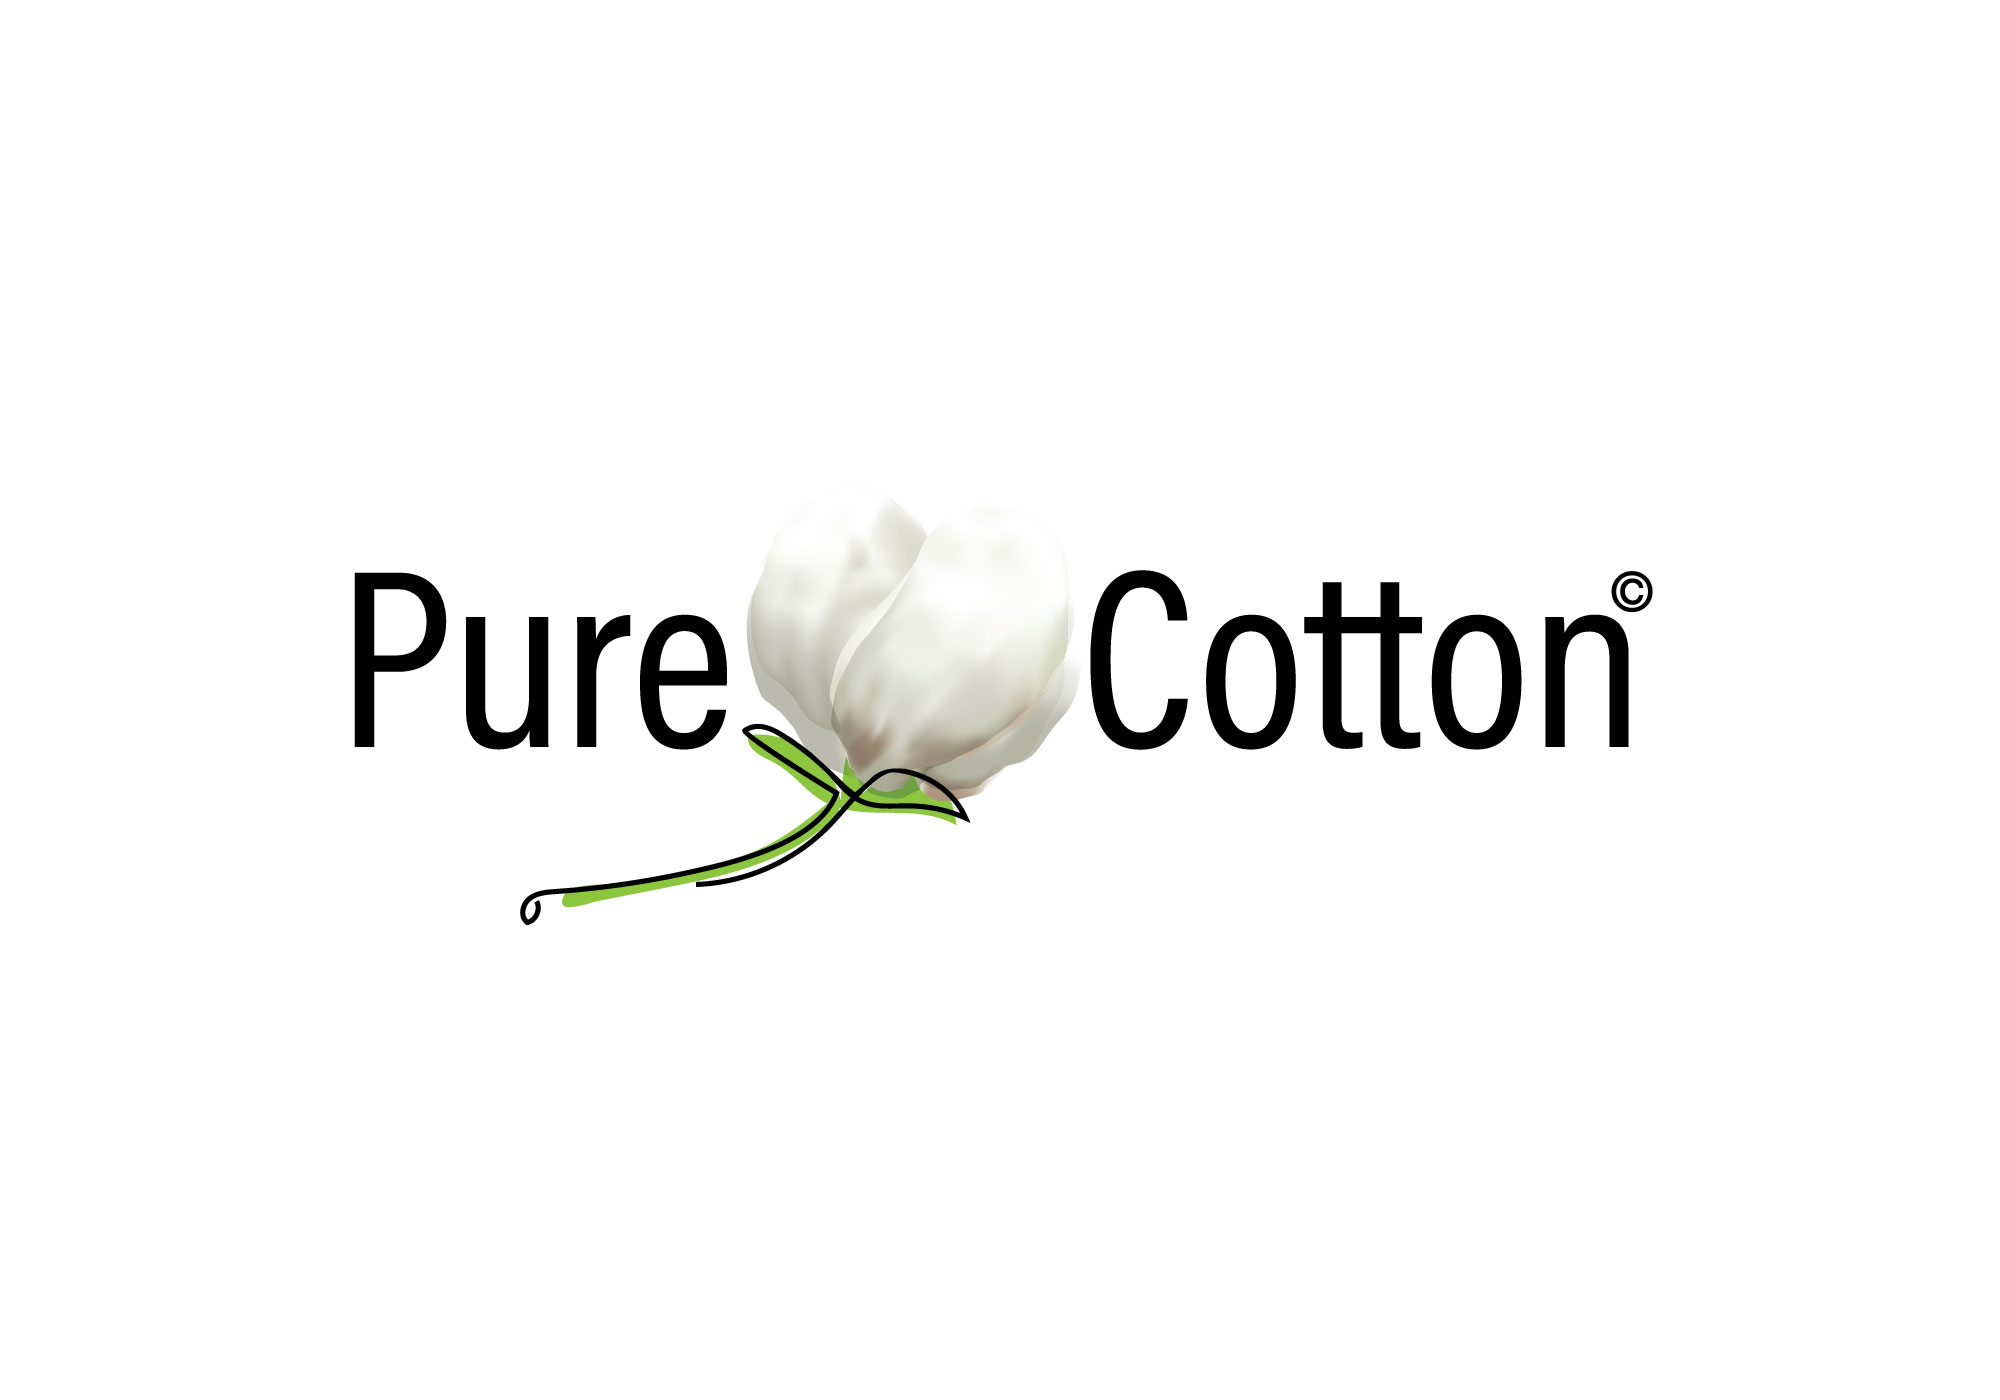 cotton flower in circle with laurel wreath | Logo Template by LogoDesign.net